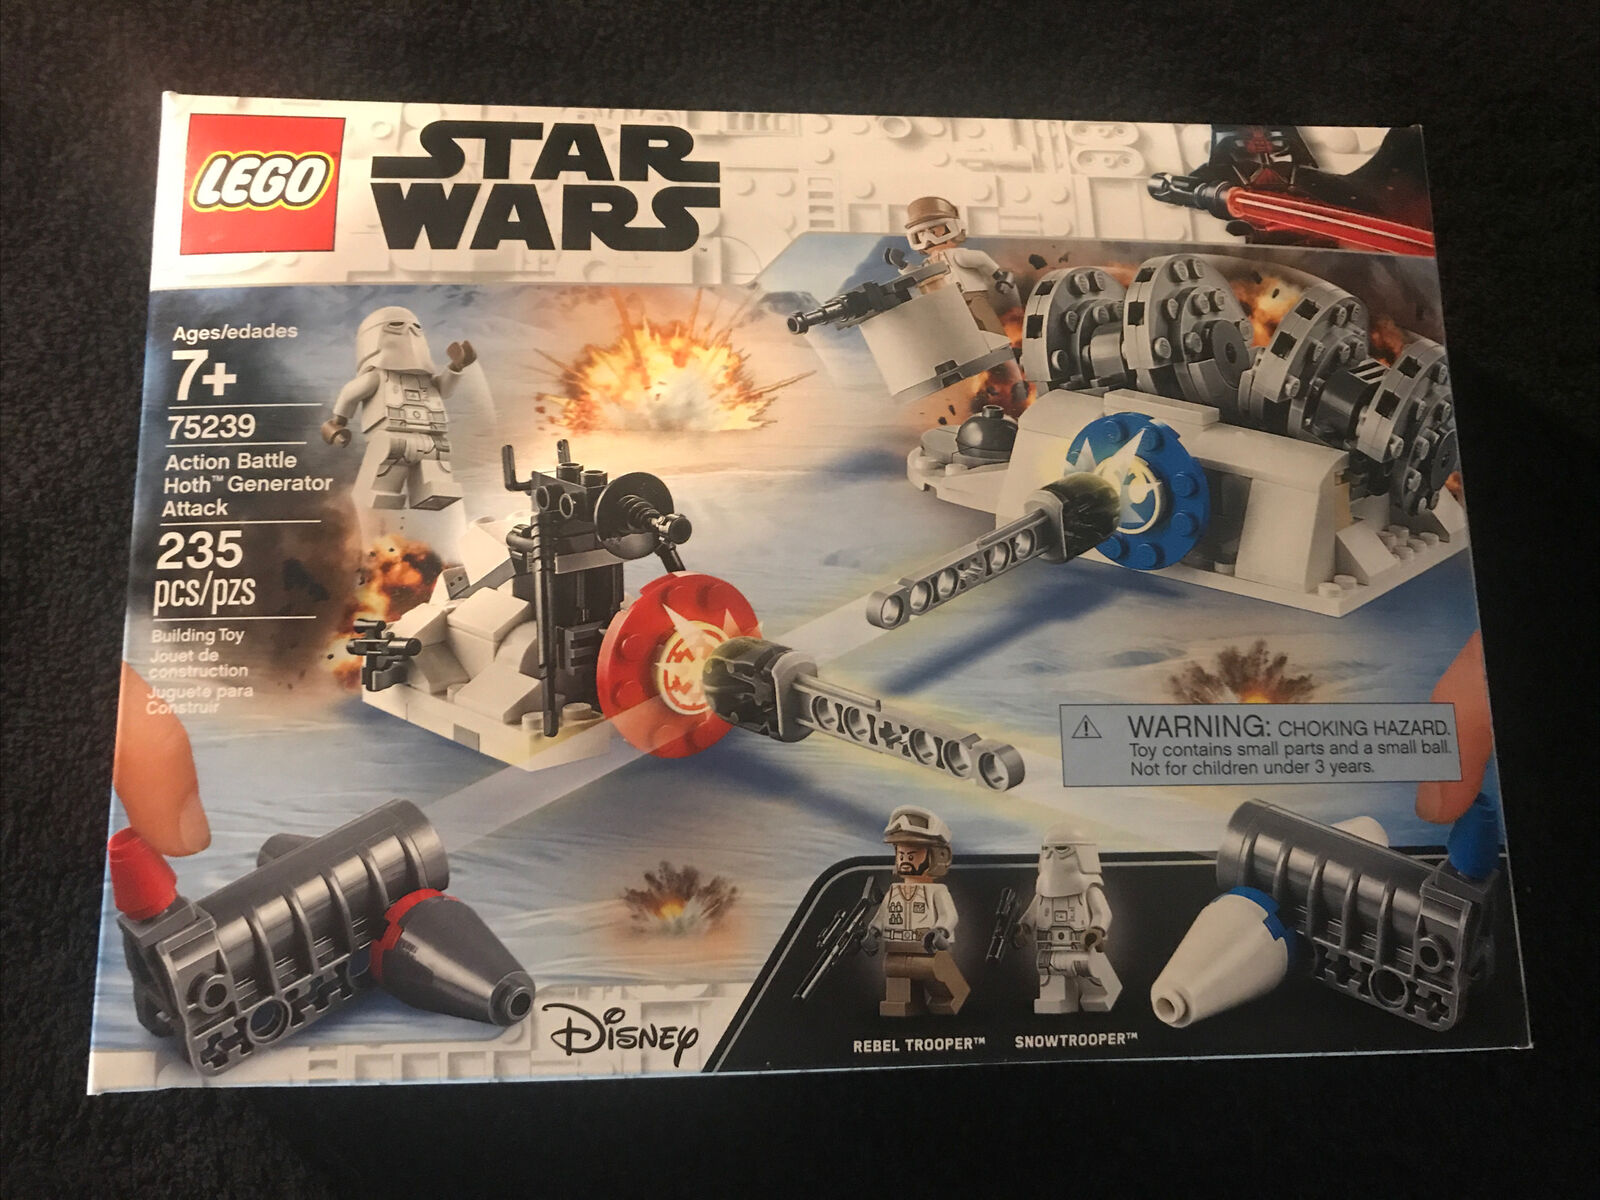 NEW LEGO Star Wars: Action Battle Hoth Generator Attack (75239)